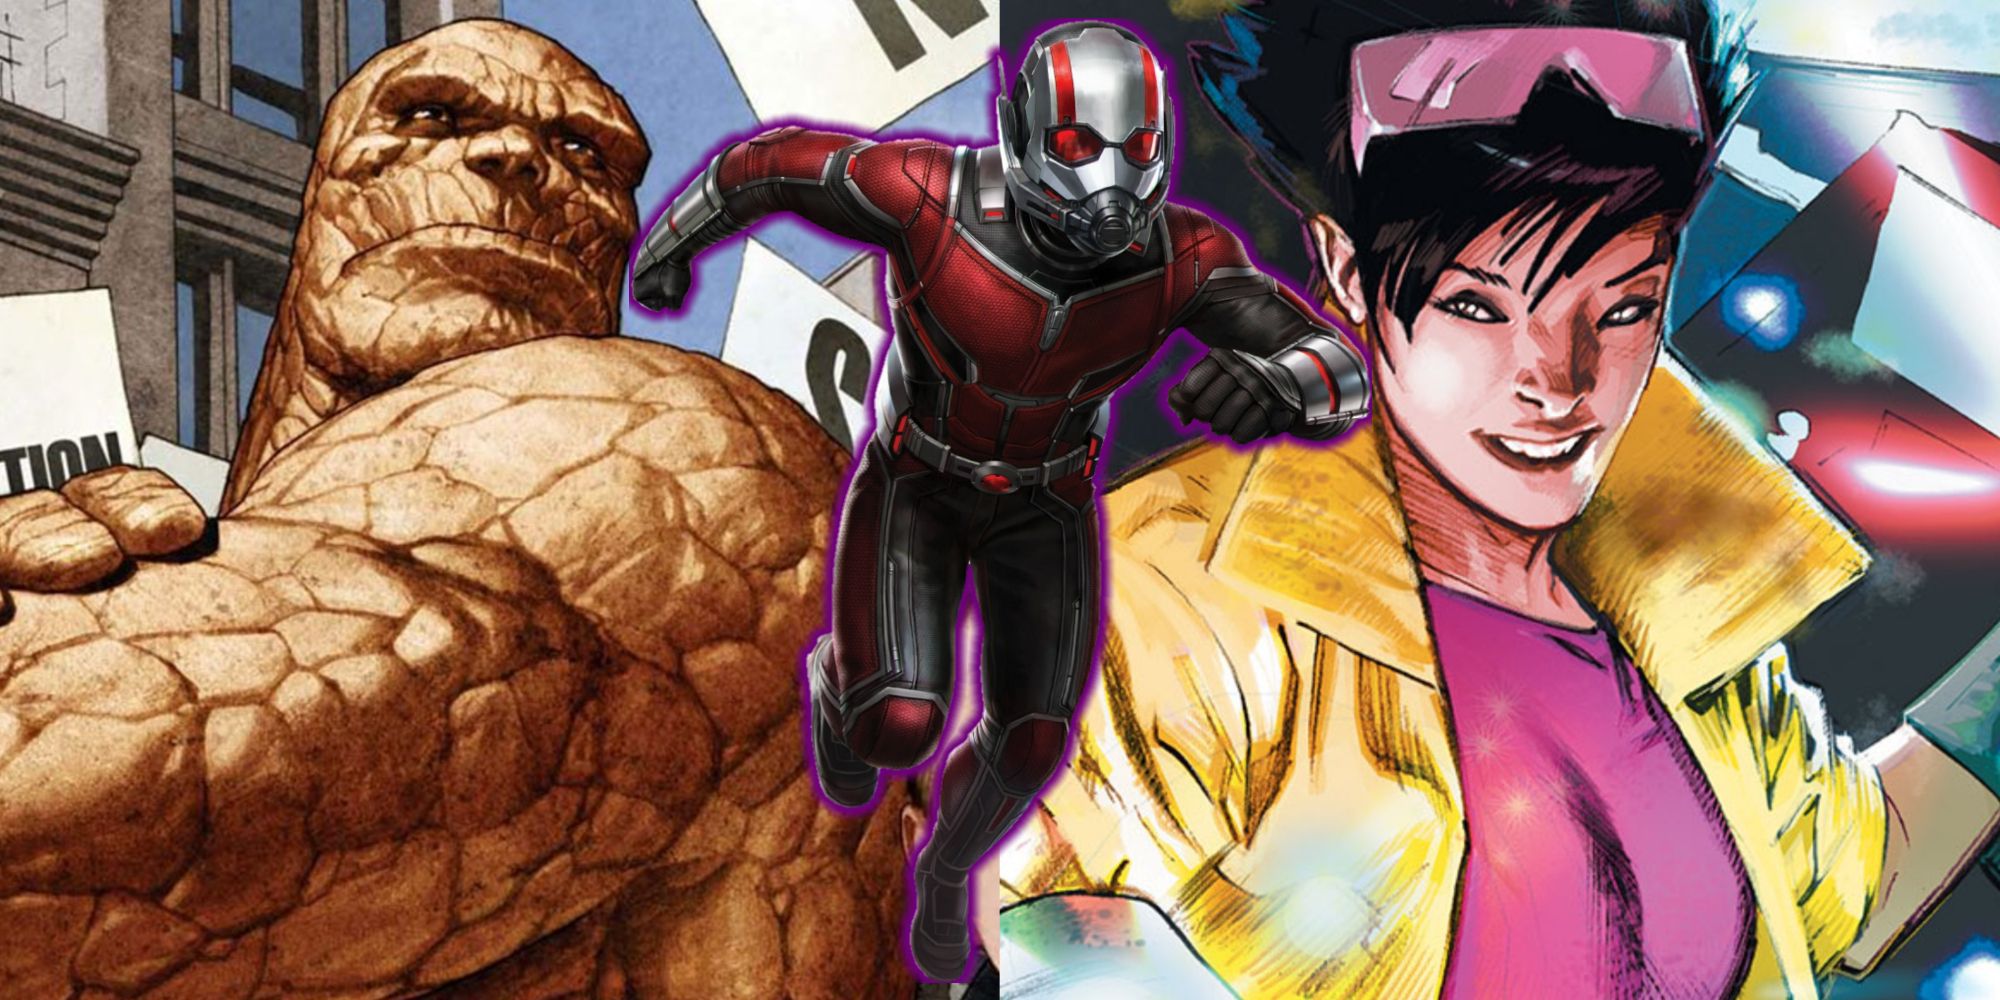 Split image of Ben Grimm AKA The Thing, Ant-Man, and Jubilee